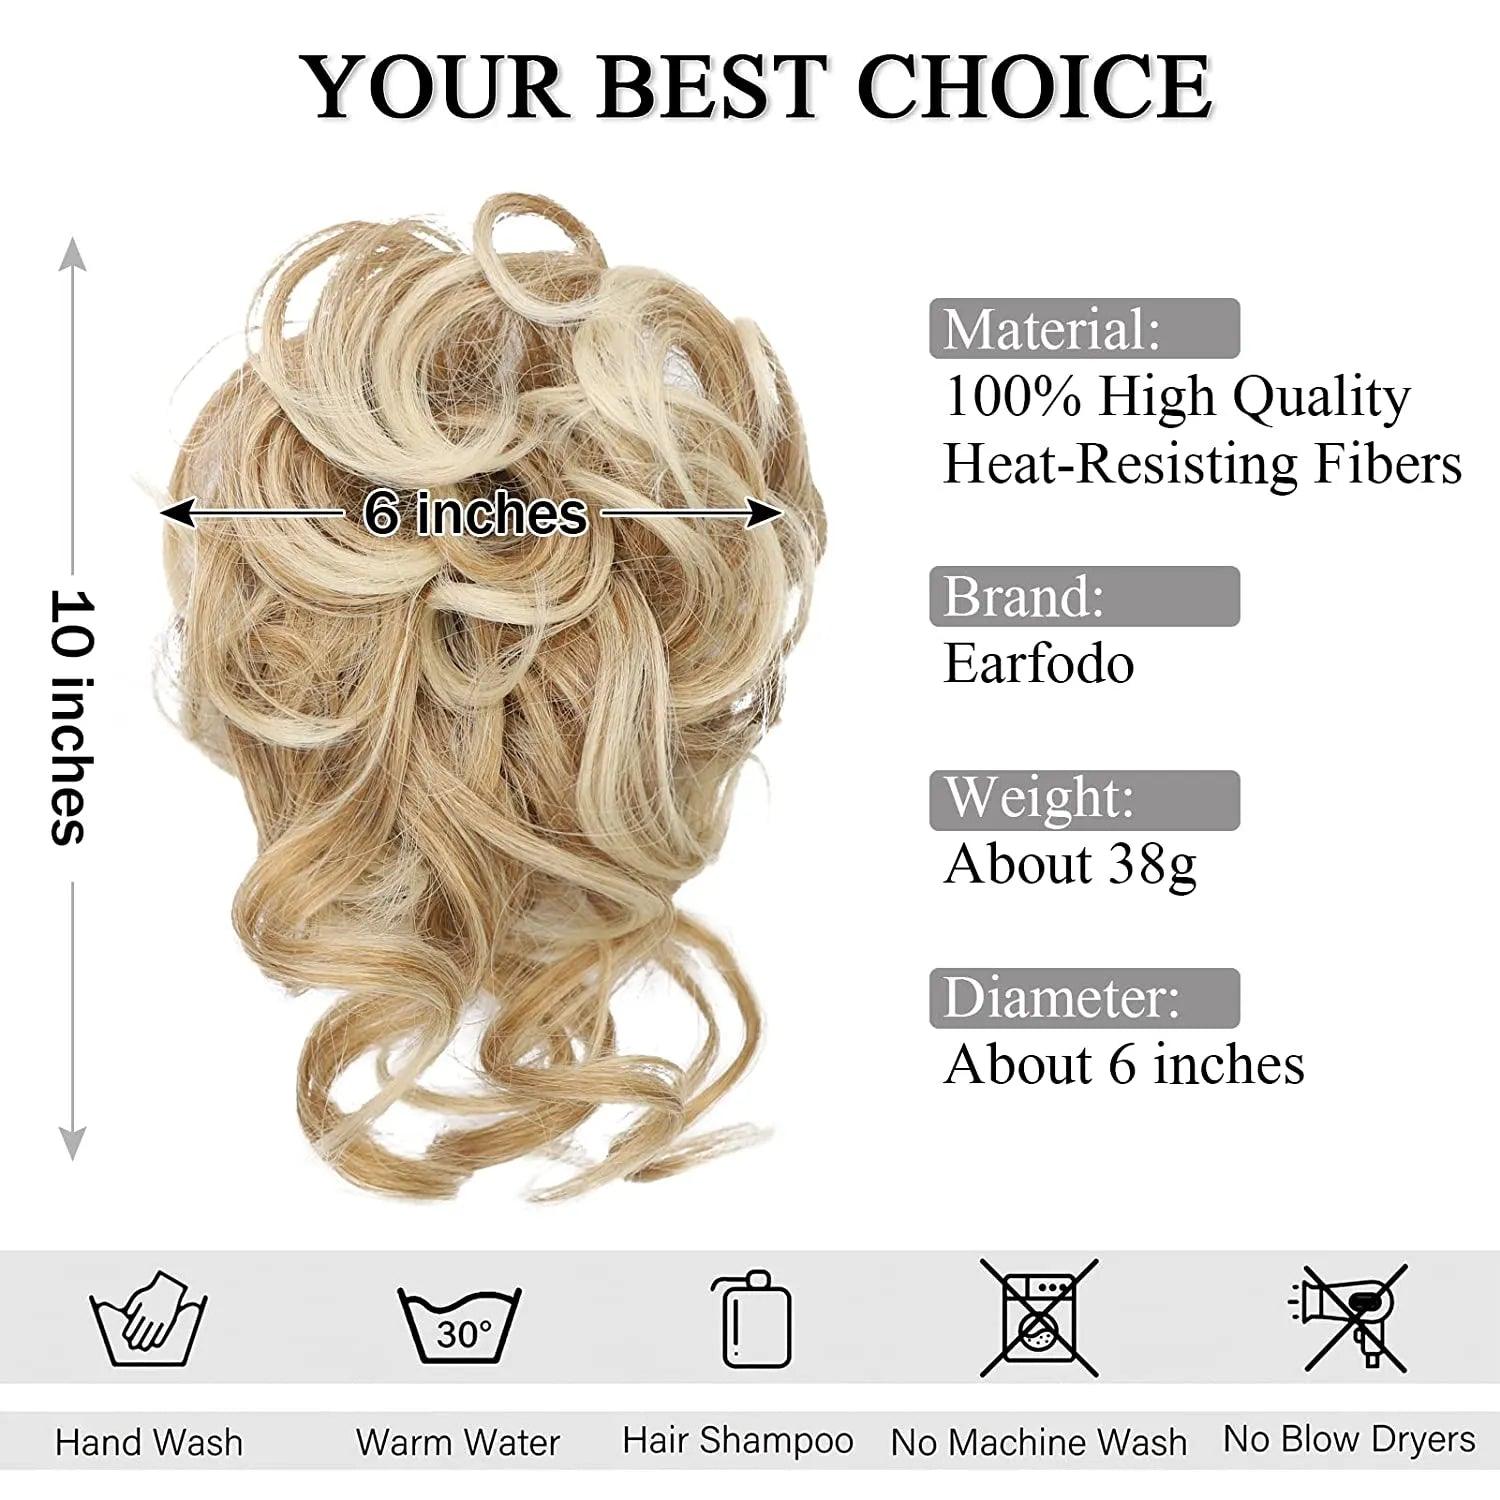 Messy Curly Synthetic Hair Chignon Bun with Elastic Band - Black/Brown Wig for Women  ourlum.com   